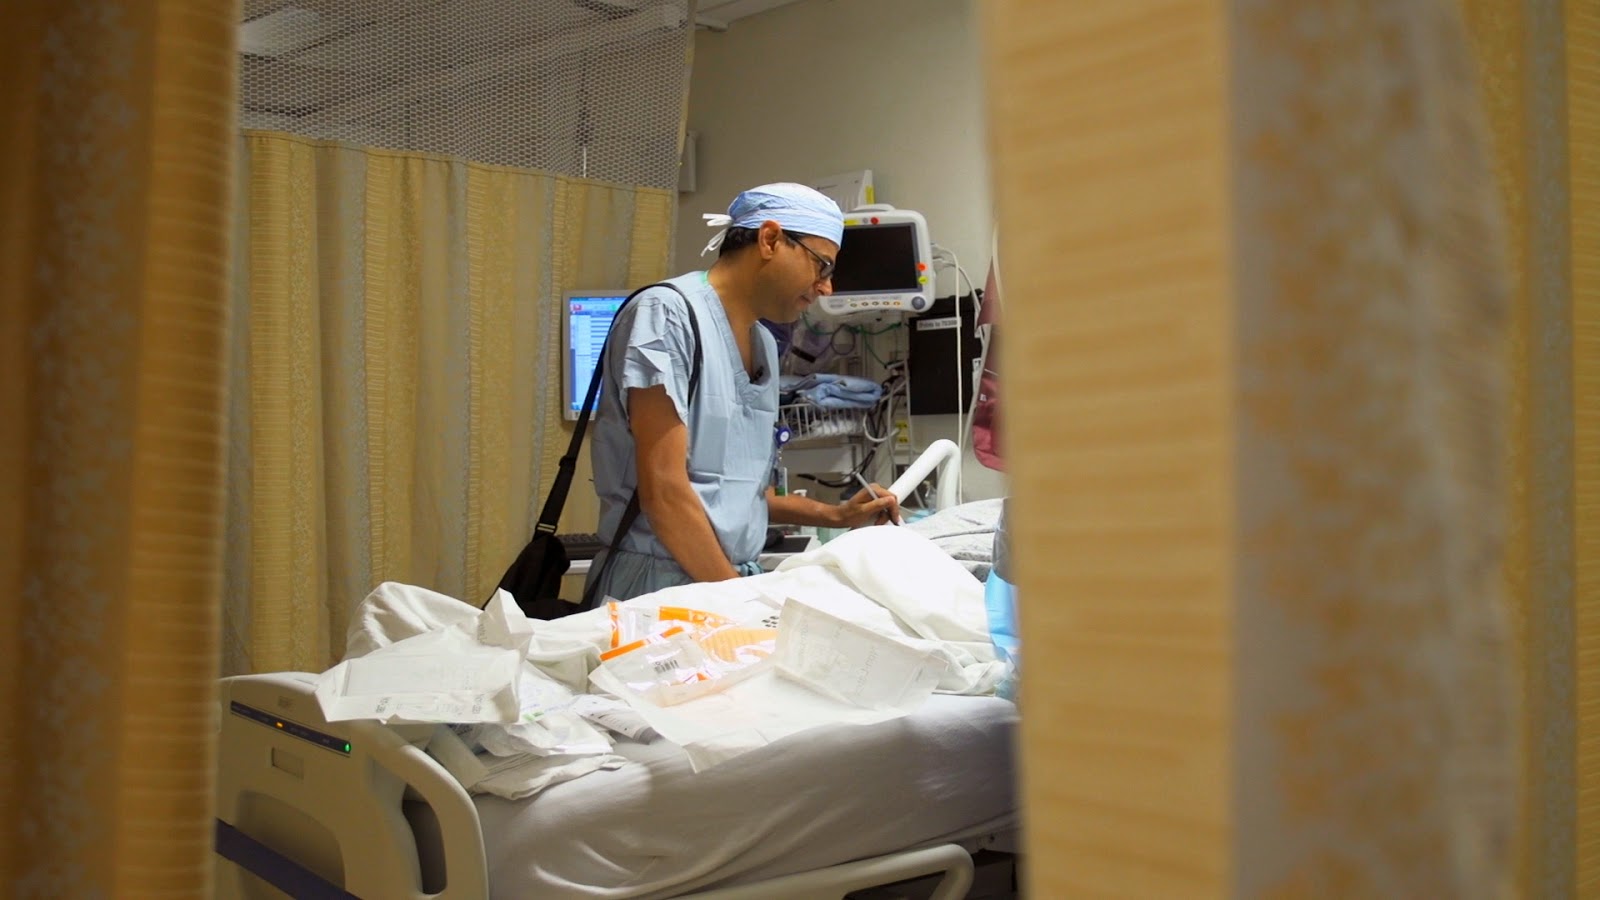 The True Art of Medicine: Atul Gawande and The Being Mortal Documentary